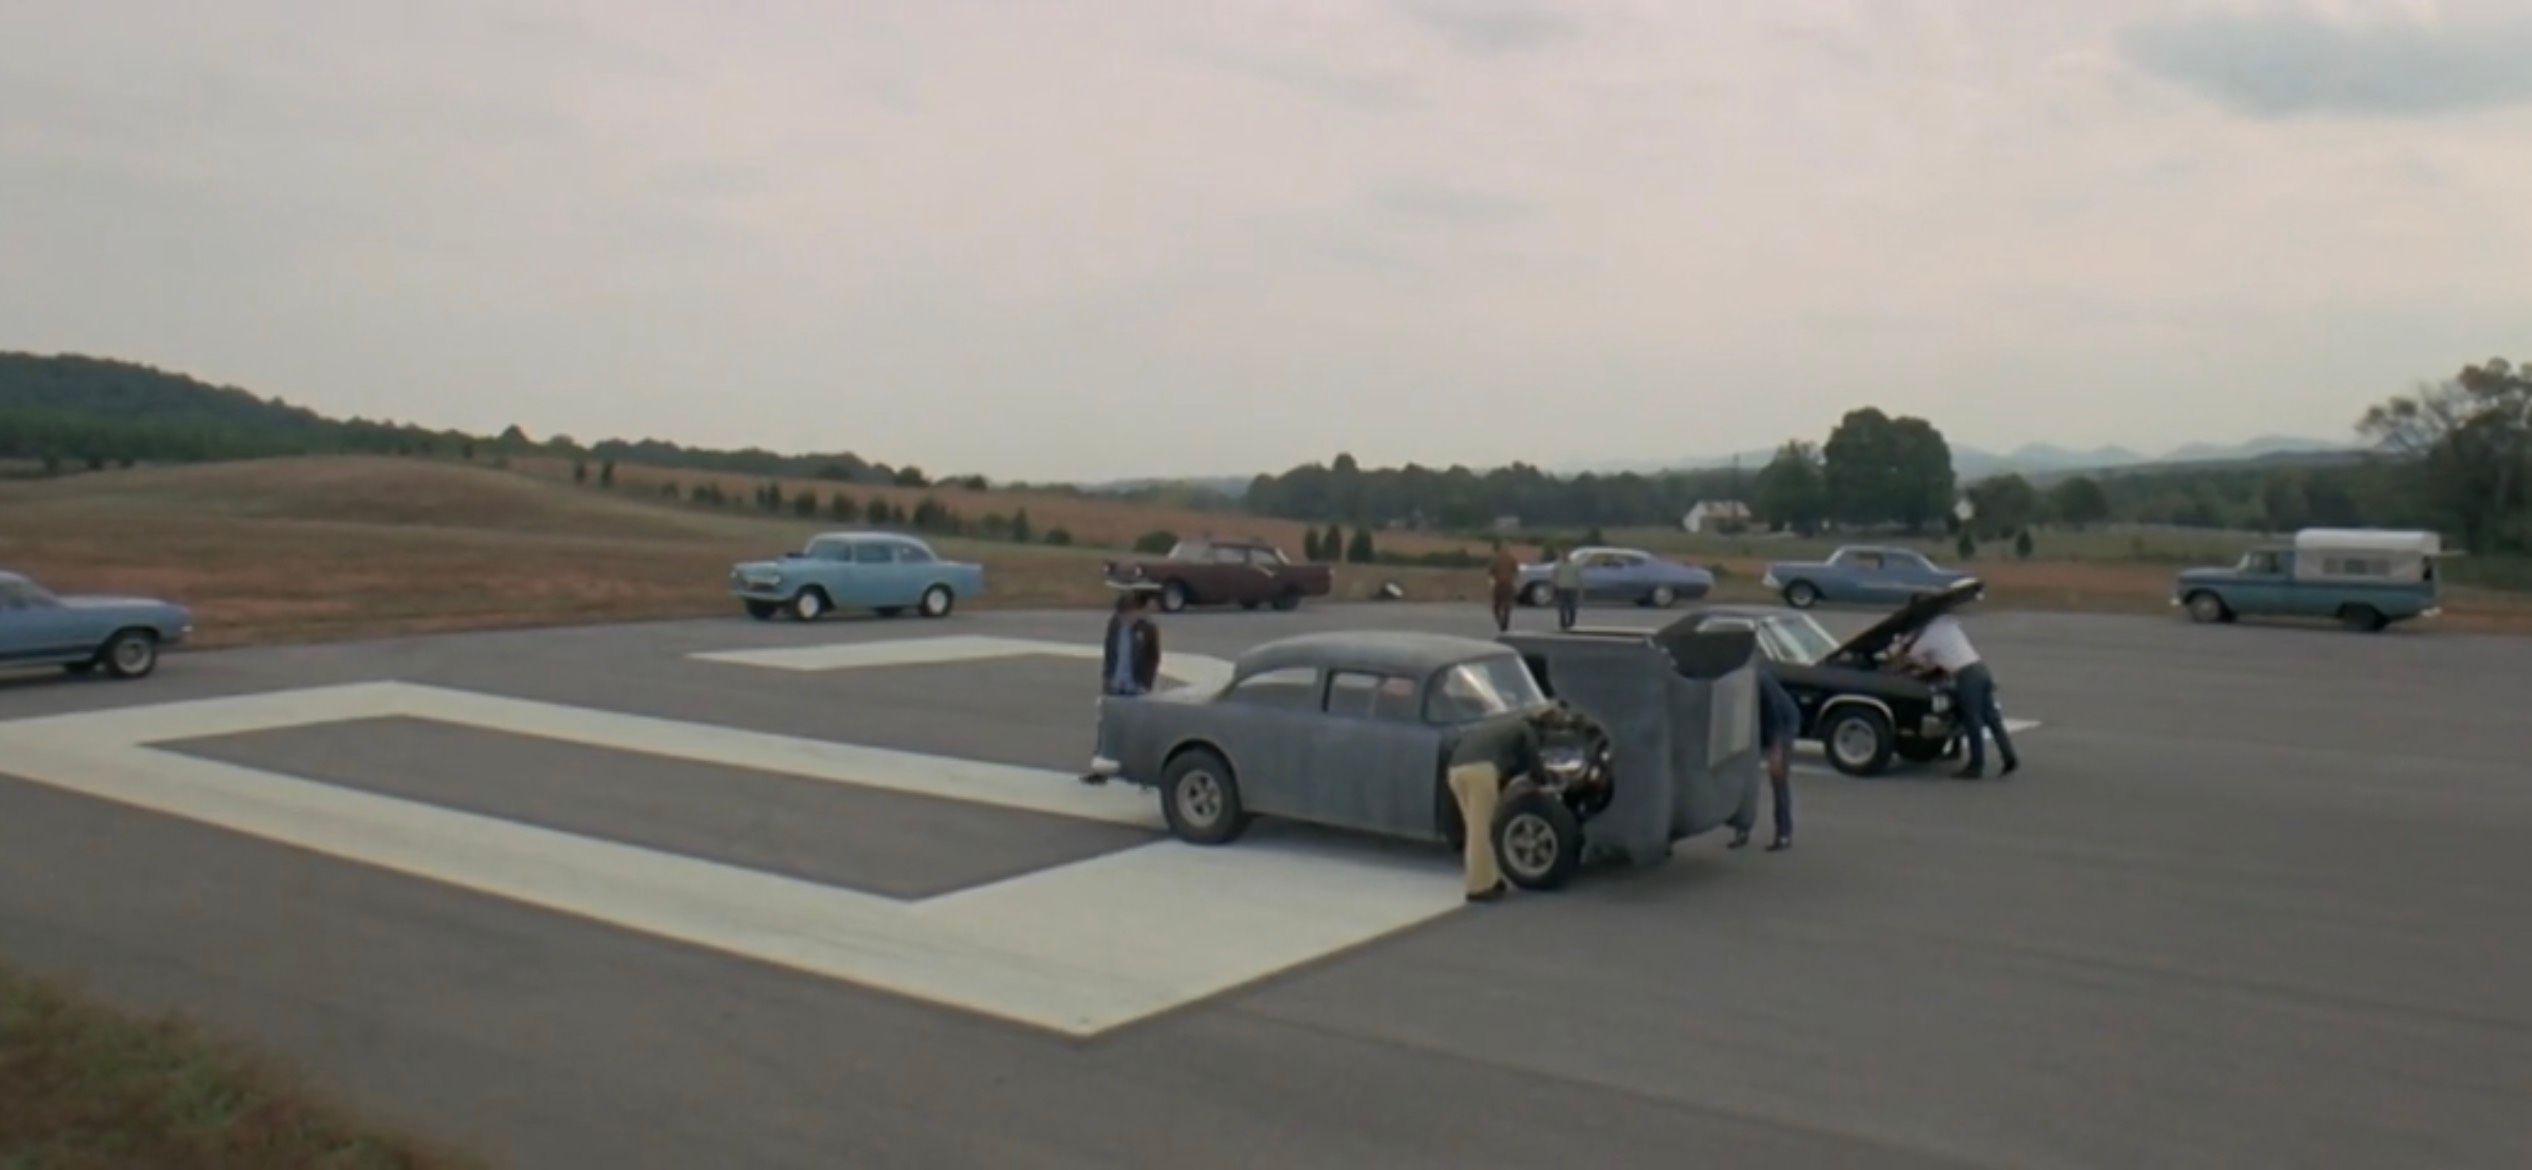 1955 Chevrolet 150 featured in Two-Lane Blacktop